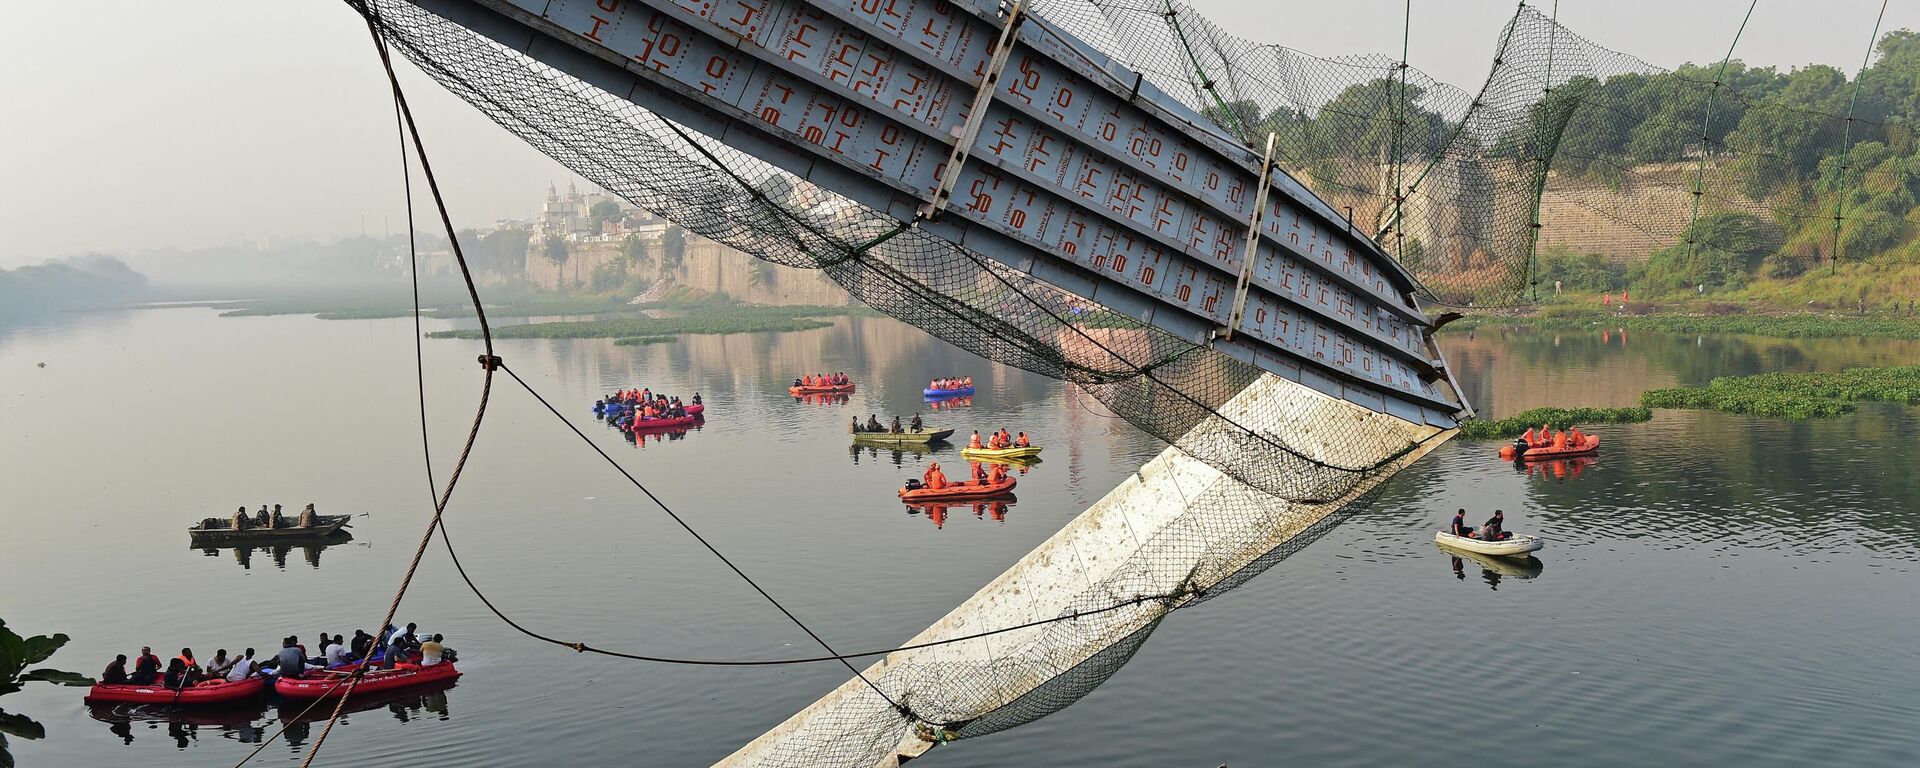 Rescue personnel conduct search operations after a bridge across the river Machchhu collapsed at Morbi in India's Gujarat state on October 31, 2022 - Sputnik International, 1920, 31.10.2022